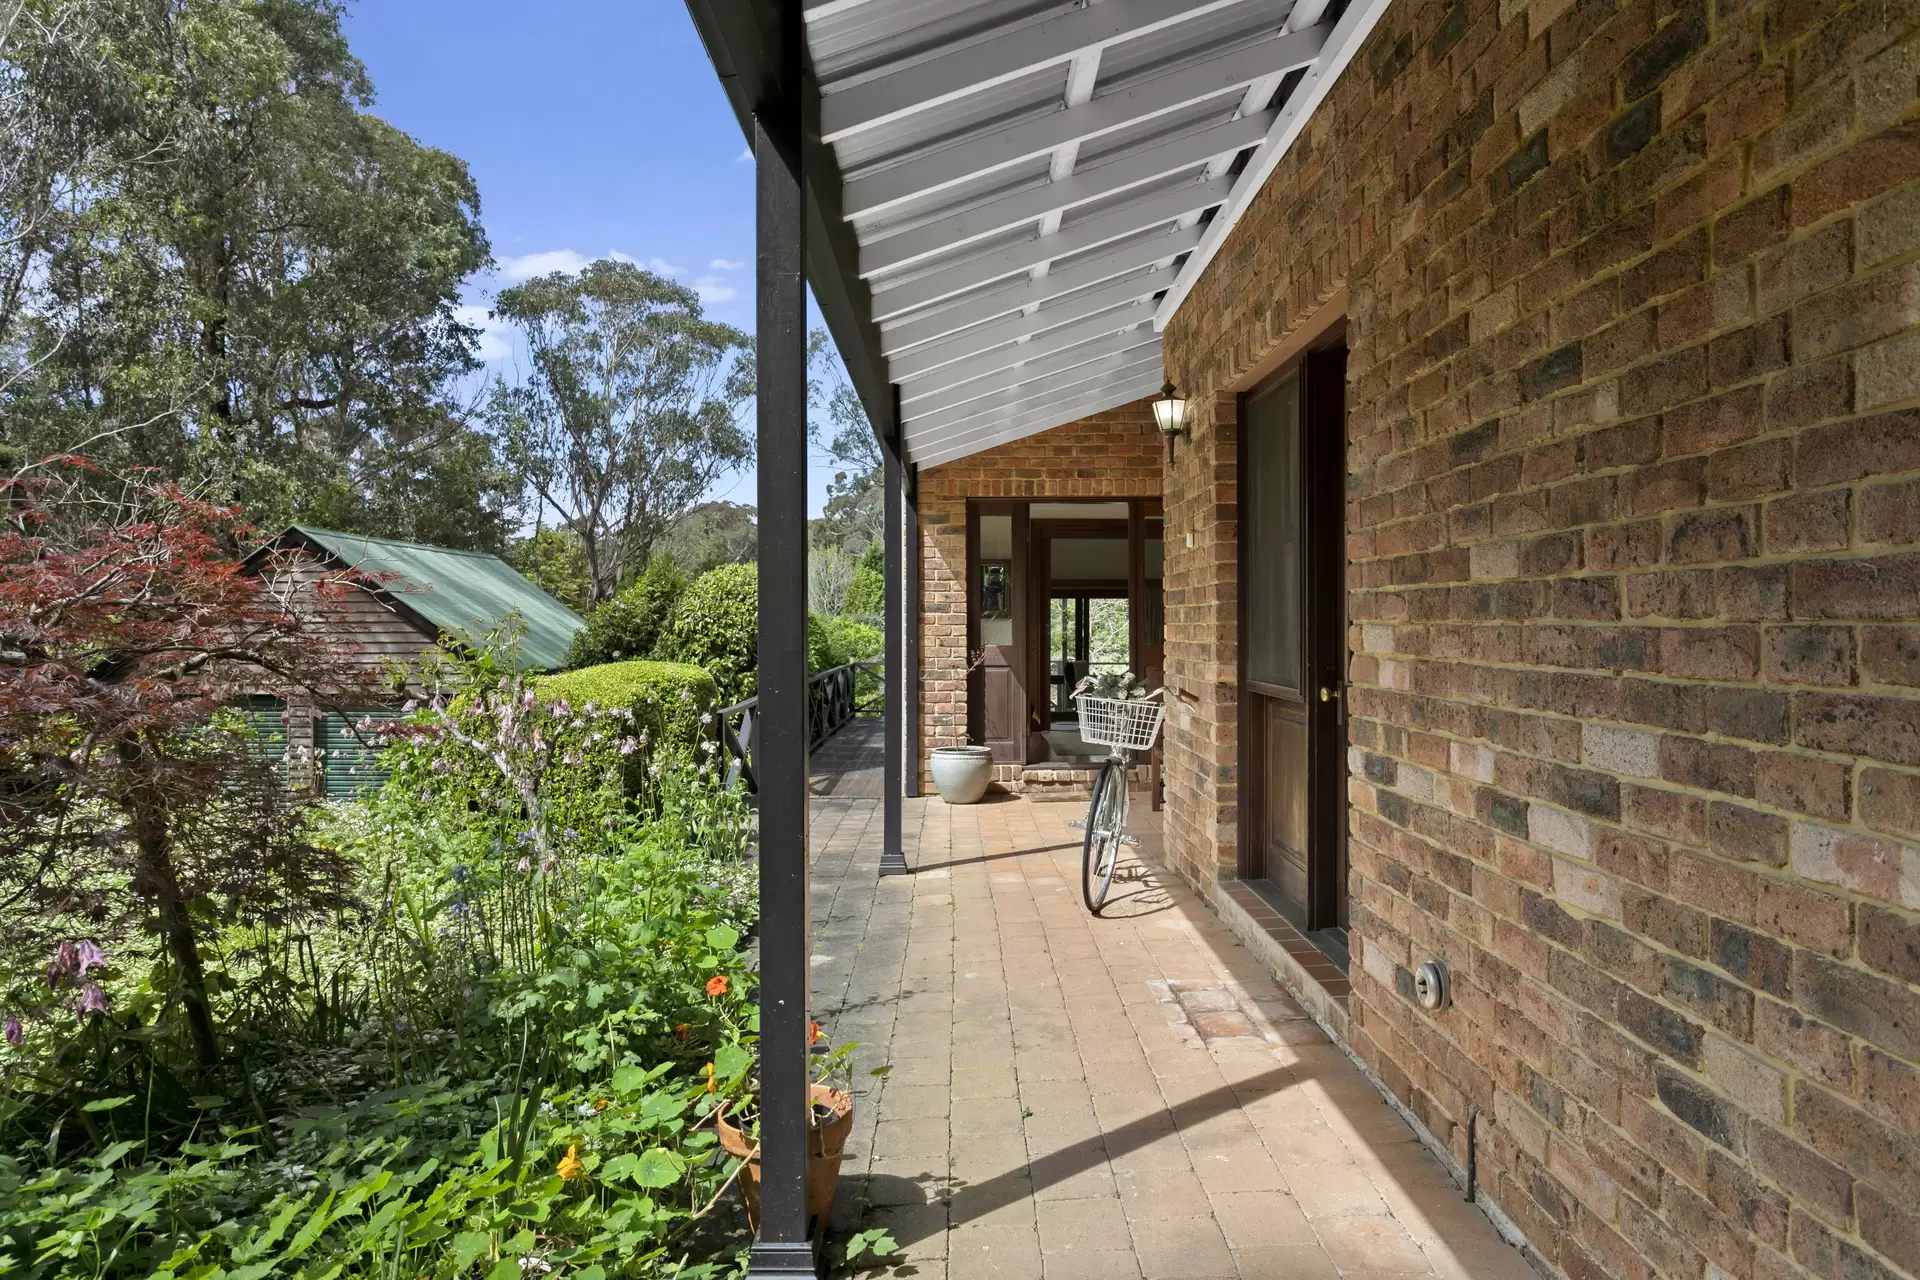 Photo #2: 3A Spencer Street, Mittagong - For Sale by Drew Lindsay Sotheby's International Realty